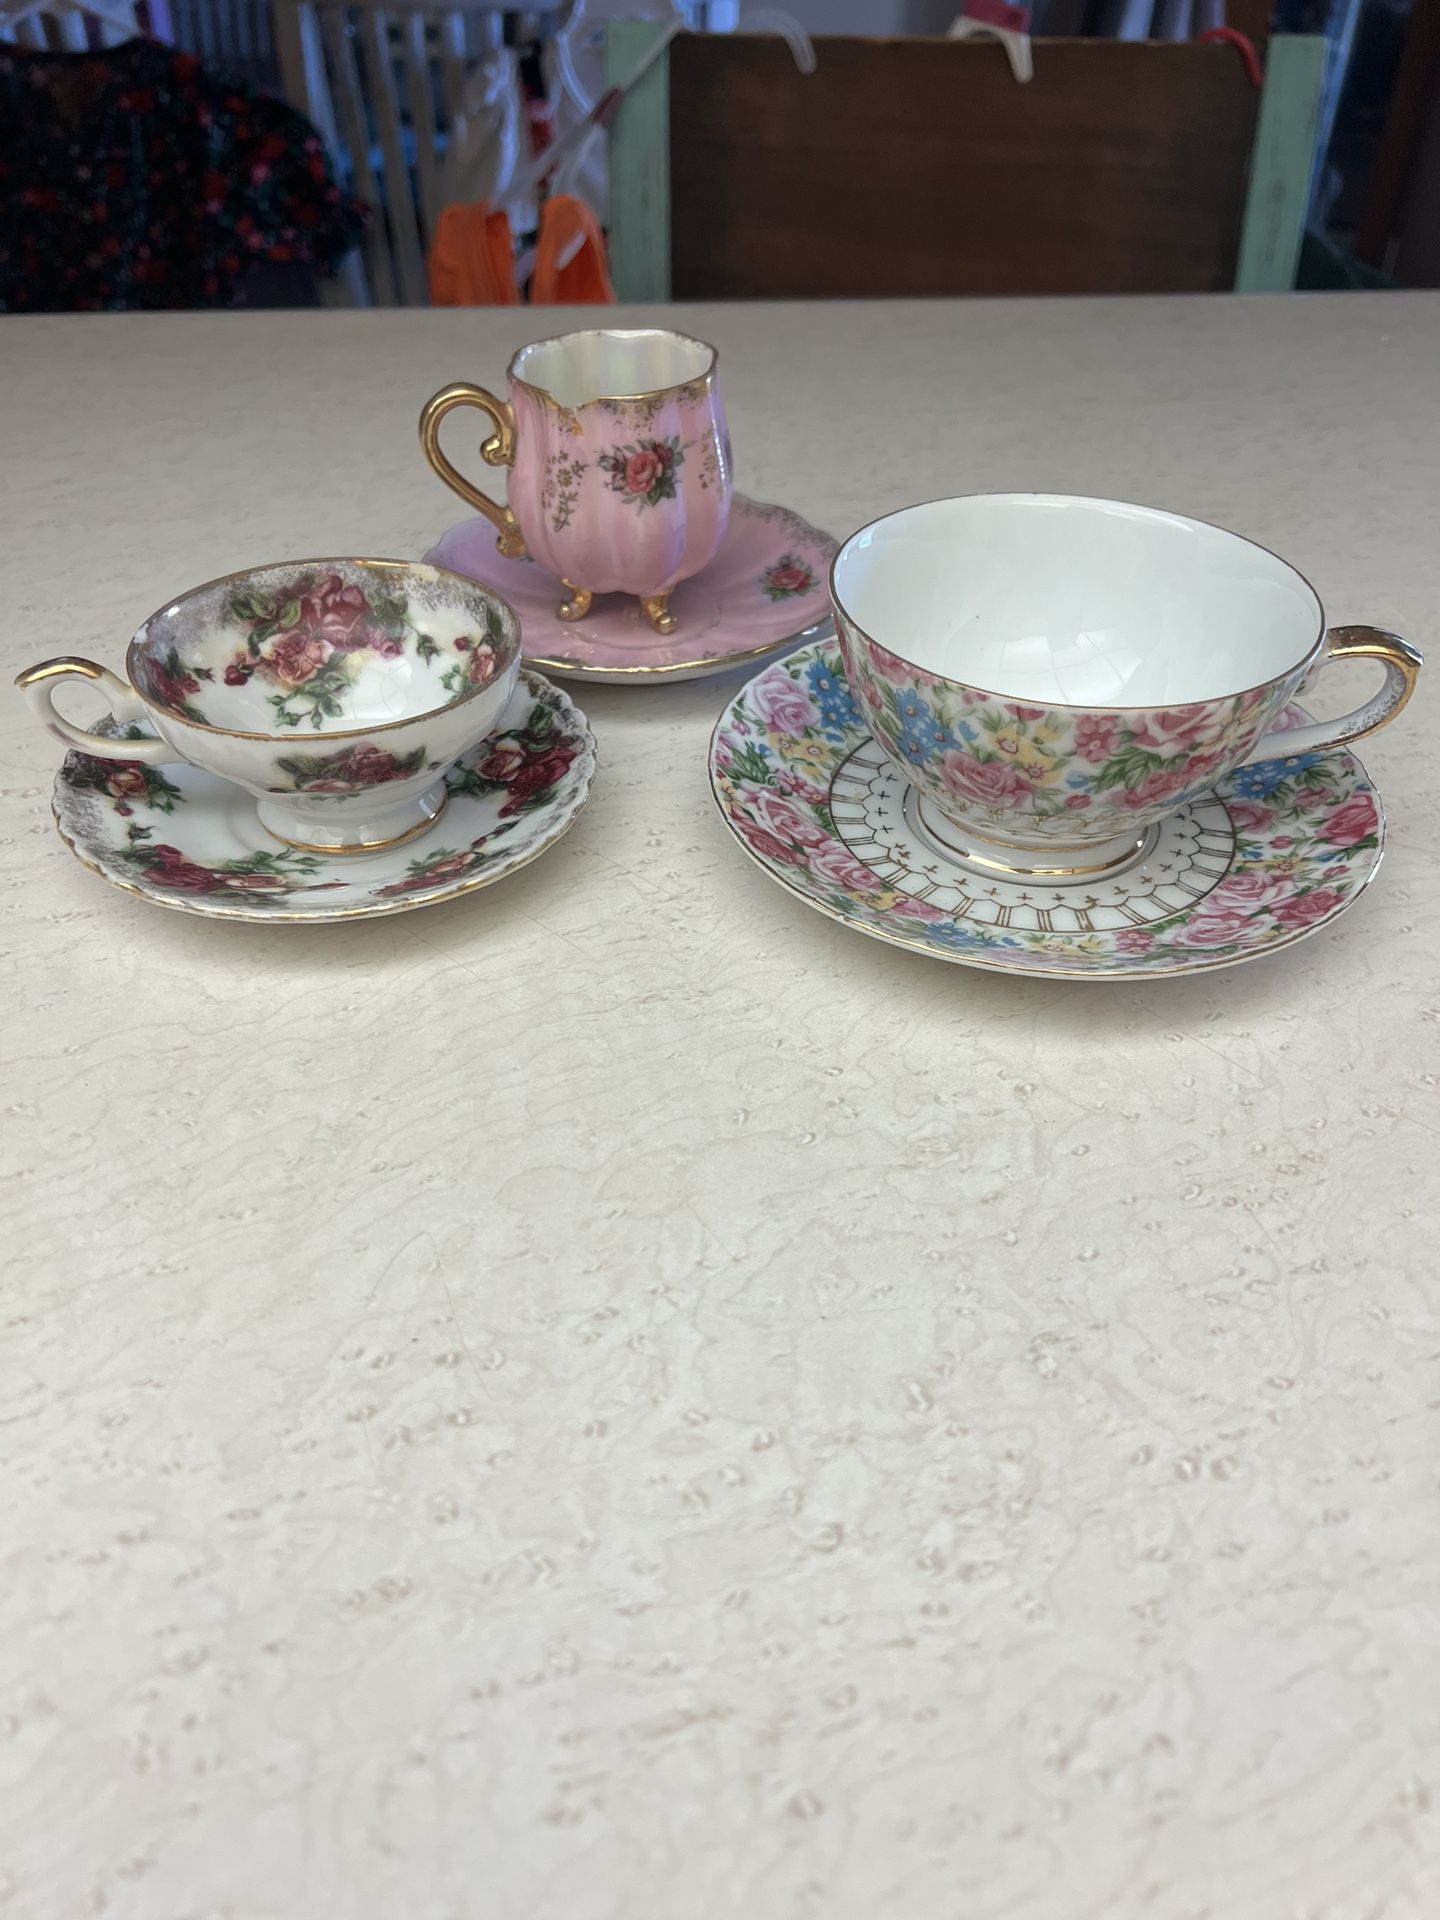 Vintage Royal Sealy Footed Tea Cup And Saucer Pink And Red Roses